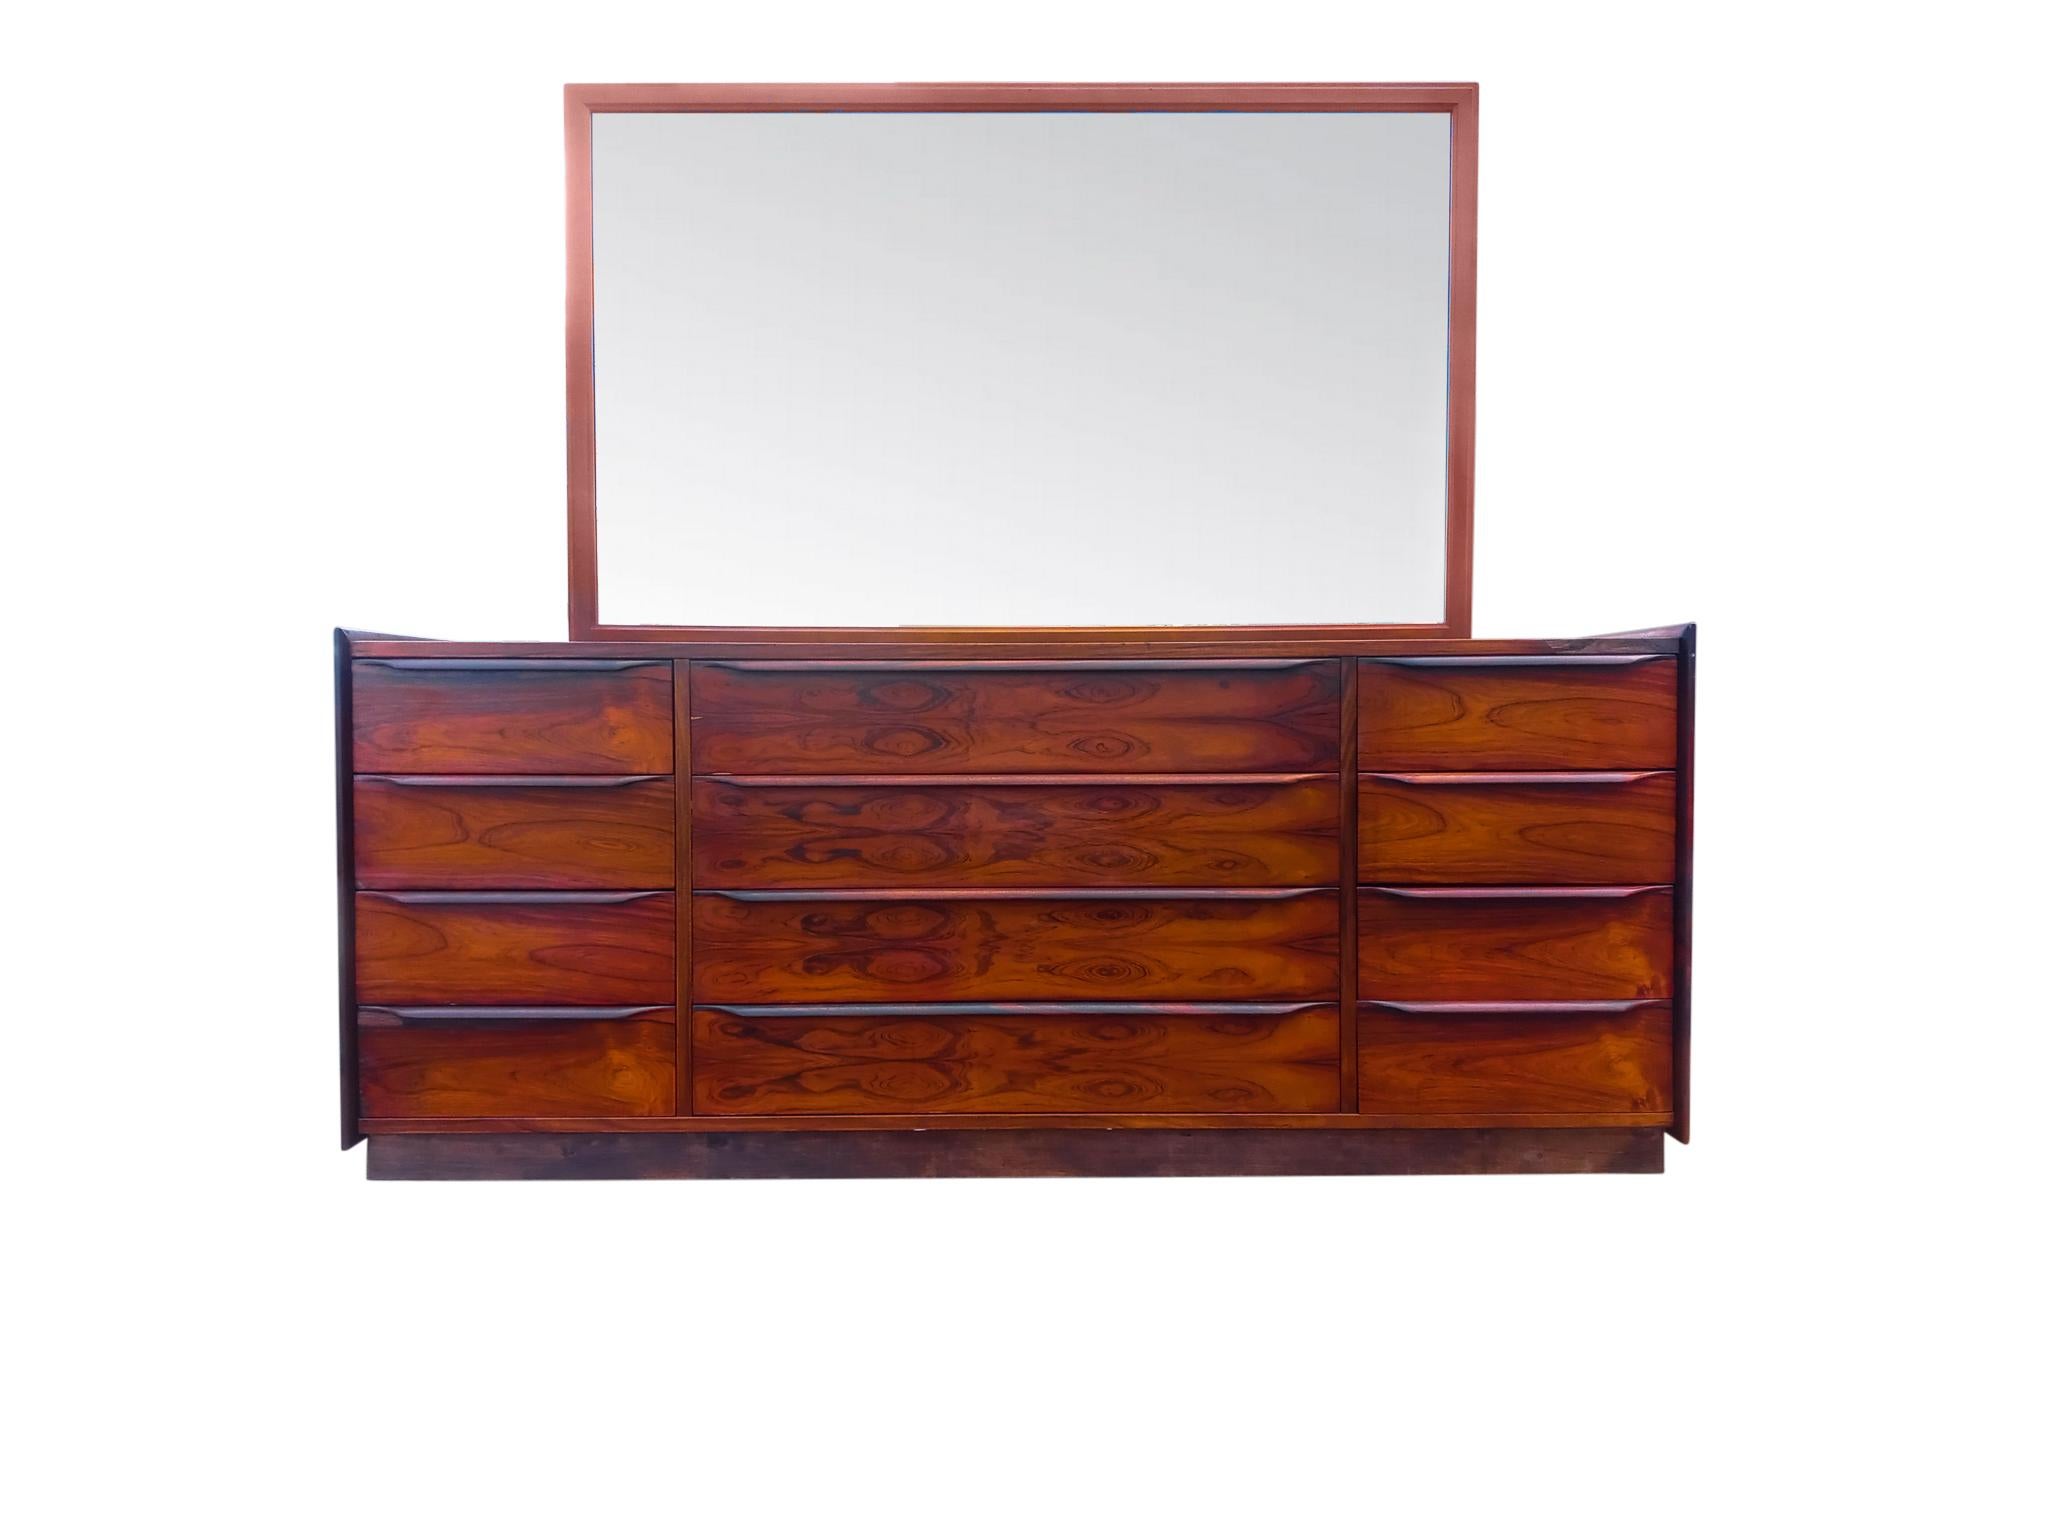 Wow, 12 gorgeous drawers & sleek cabinet in top grain and super expressive rosewood! And mounted too is a large teak frame mirror. A stunning and practical combo. Notice the sculptured solid rosewood handles. Also the side panels that extend above